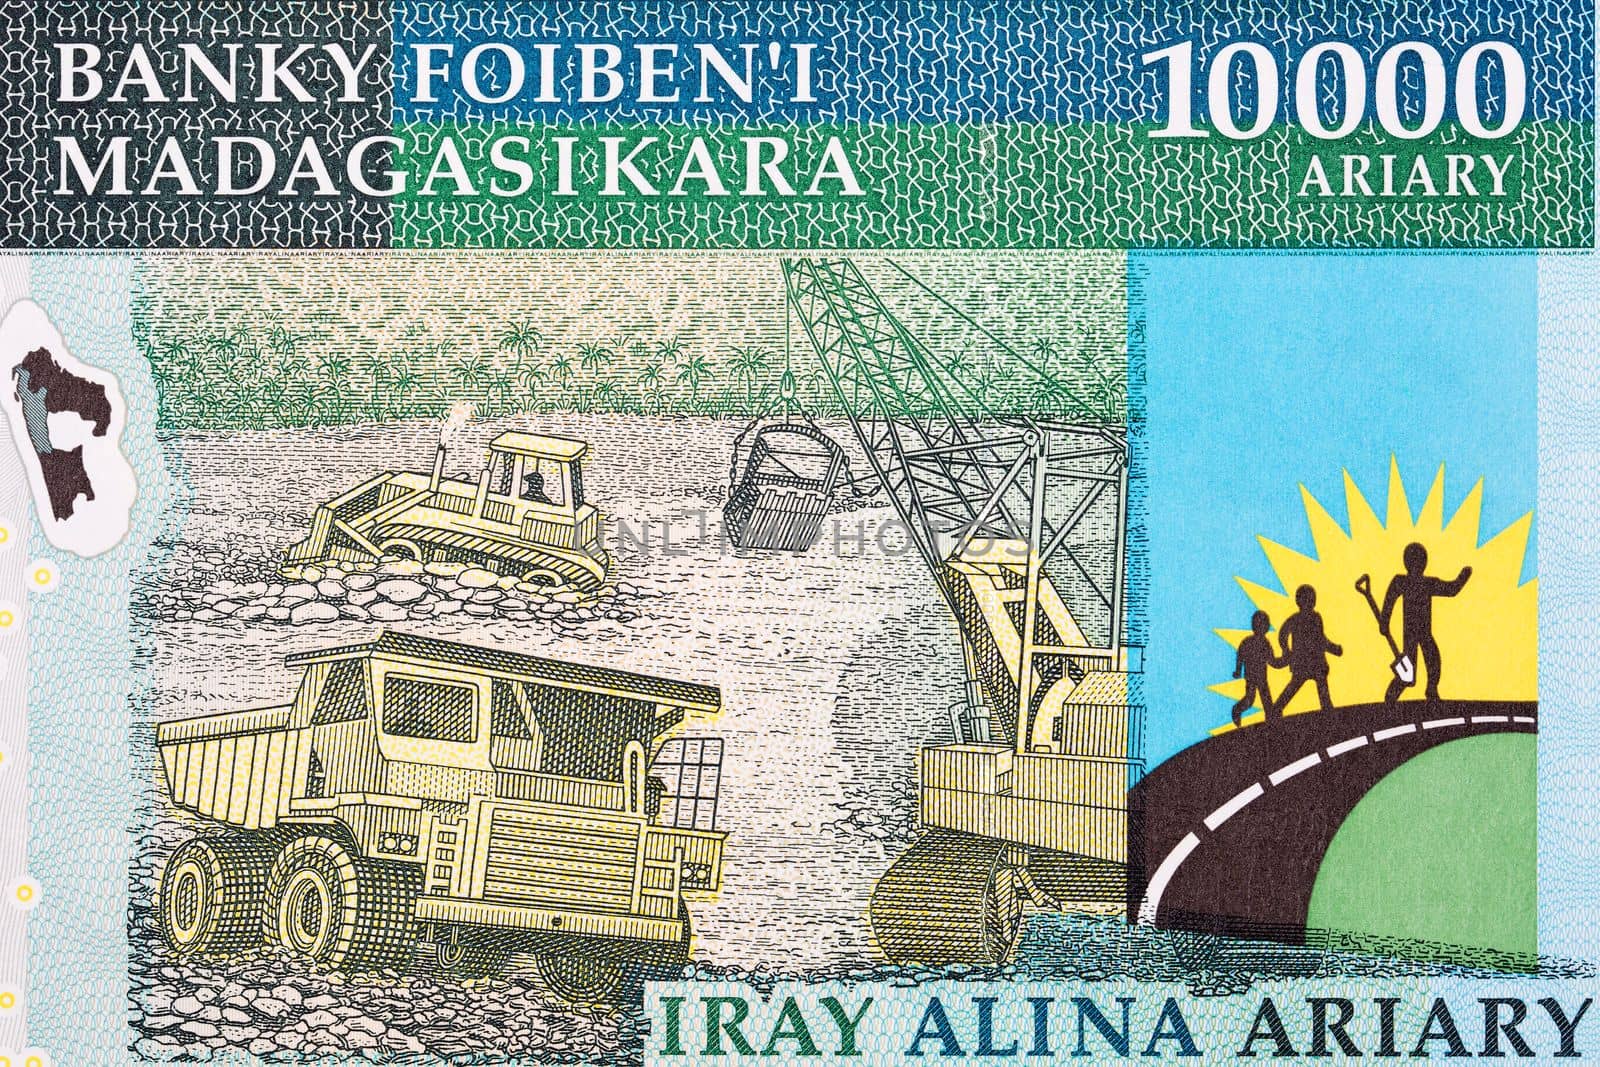 Road building from old Malagasy money - Ariary